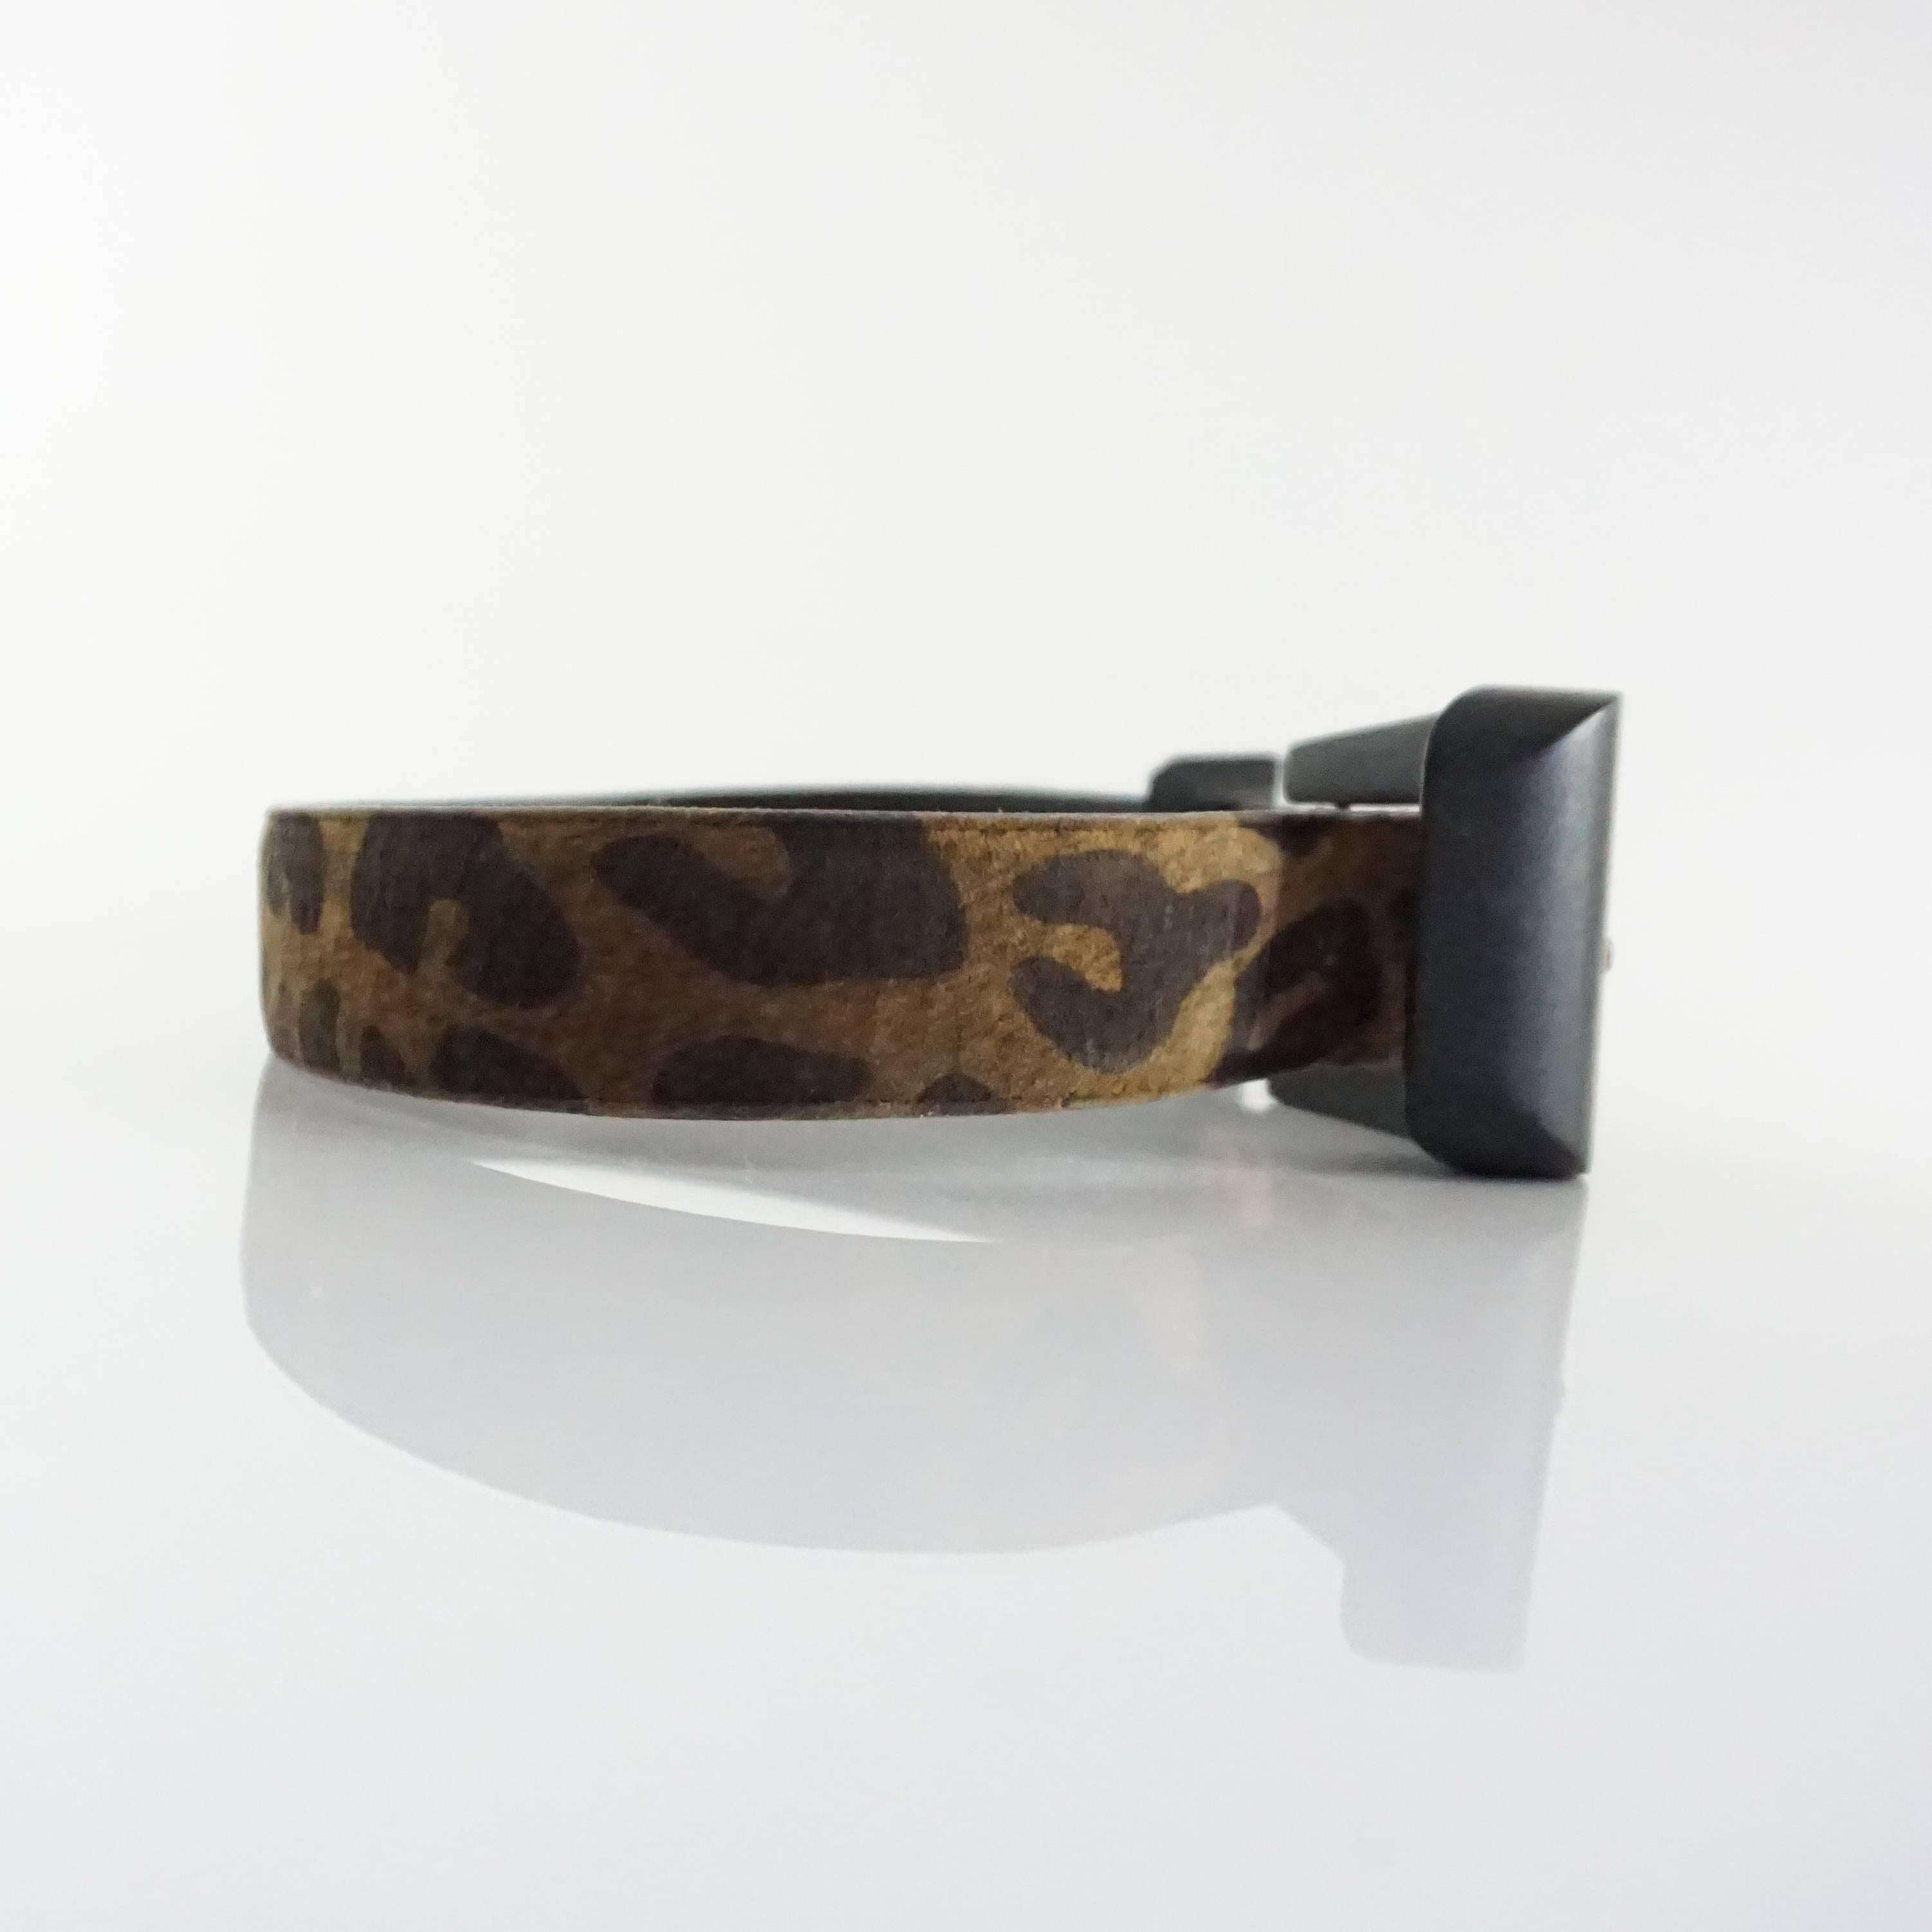 This  Patricia von Musulin belt is animal print with a large wooden black buckle. This belt is in very good condition with minor scratches / markings on the buckle and interior.

Measurements
Length of buckle: 3.75"
Height of buckle: 2.5"